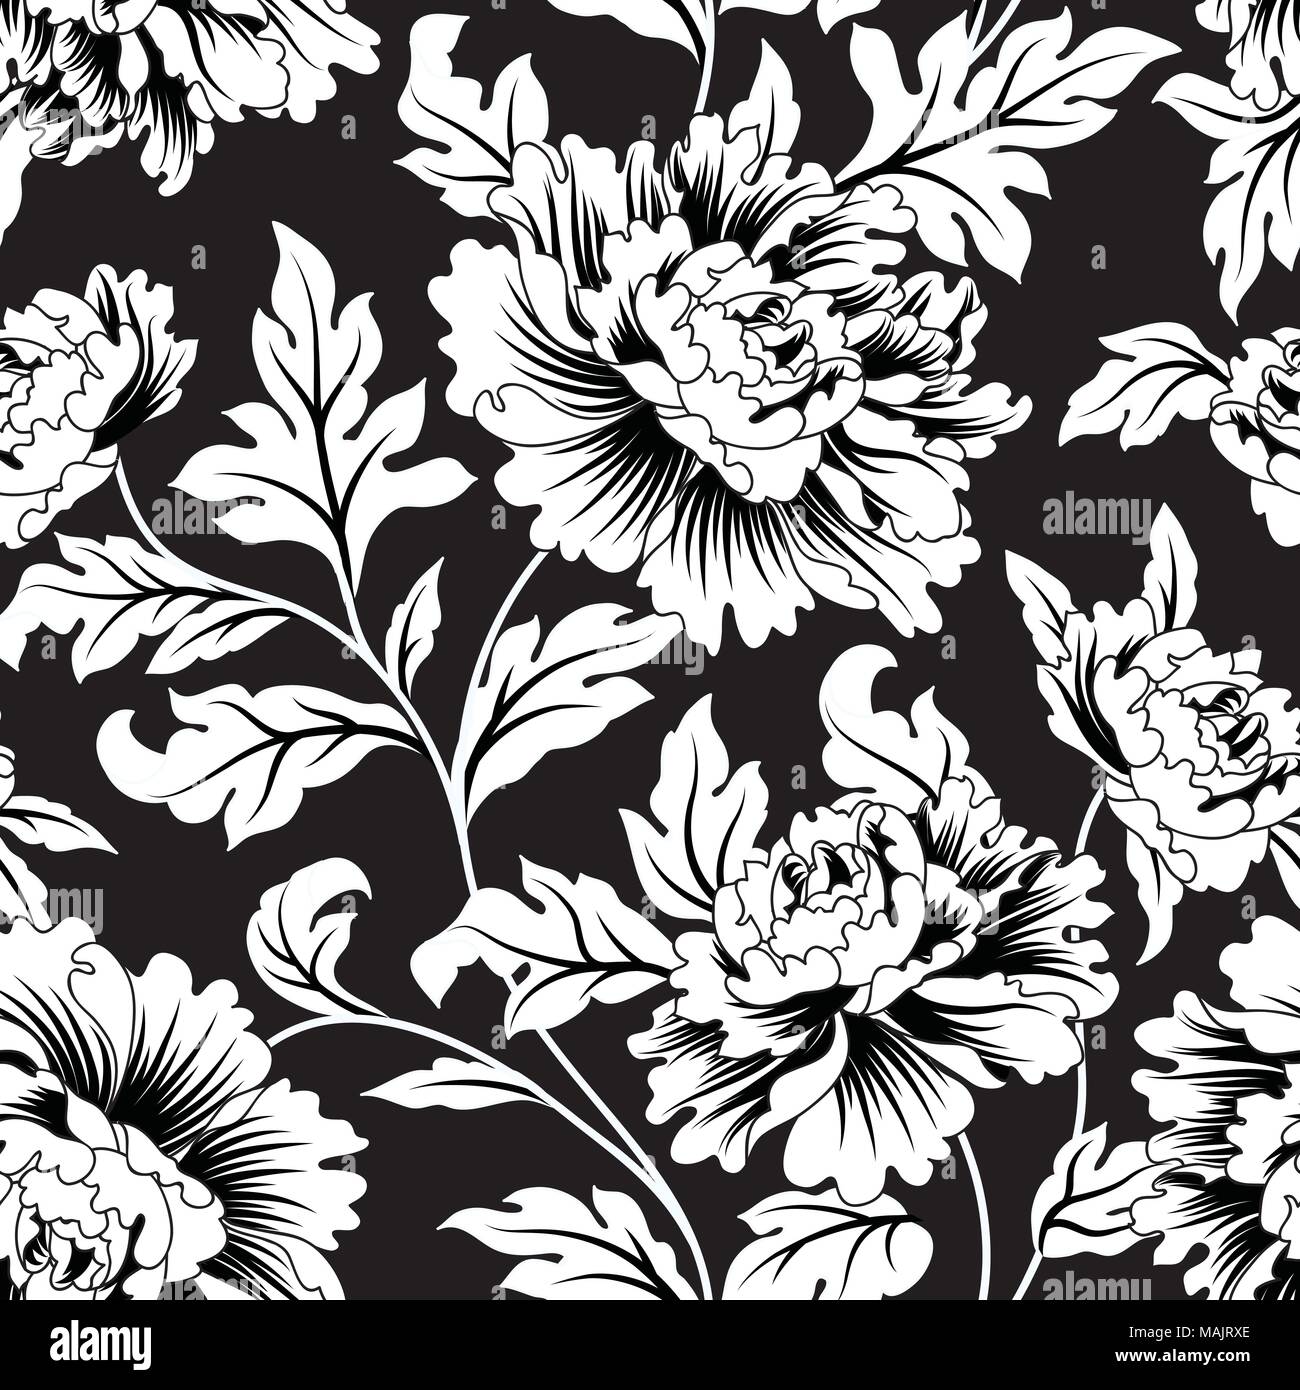 Floral seamless pattern. Abstract ornamental flowers. Flourish leaves background Stock Vector